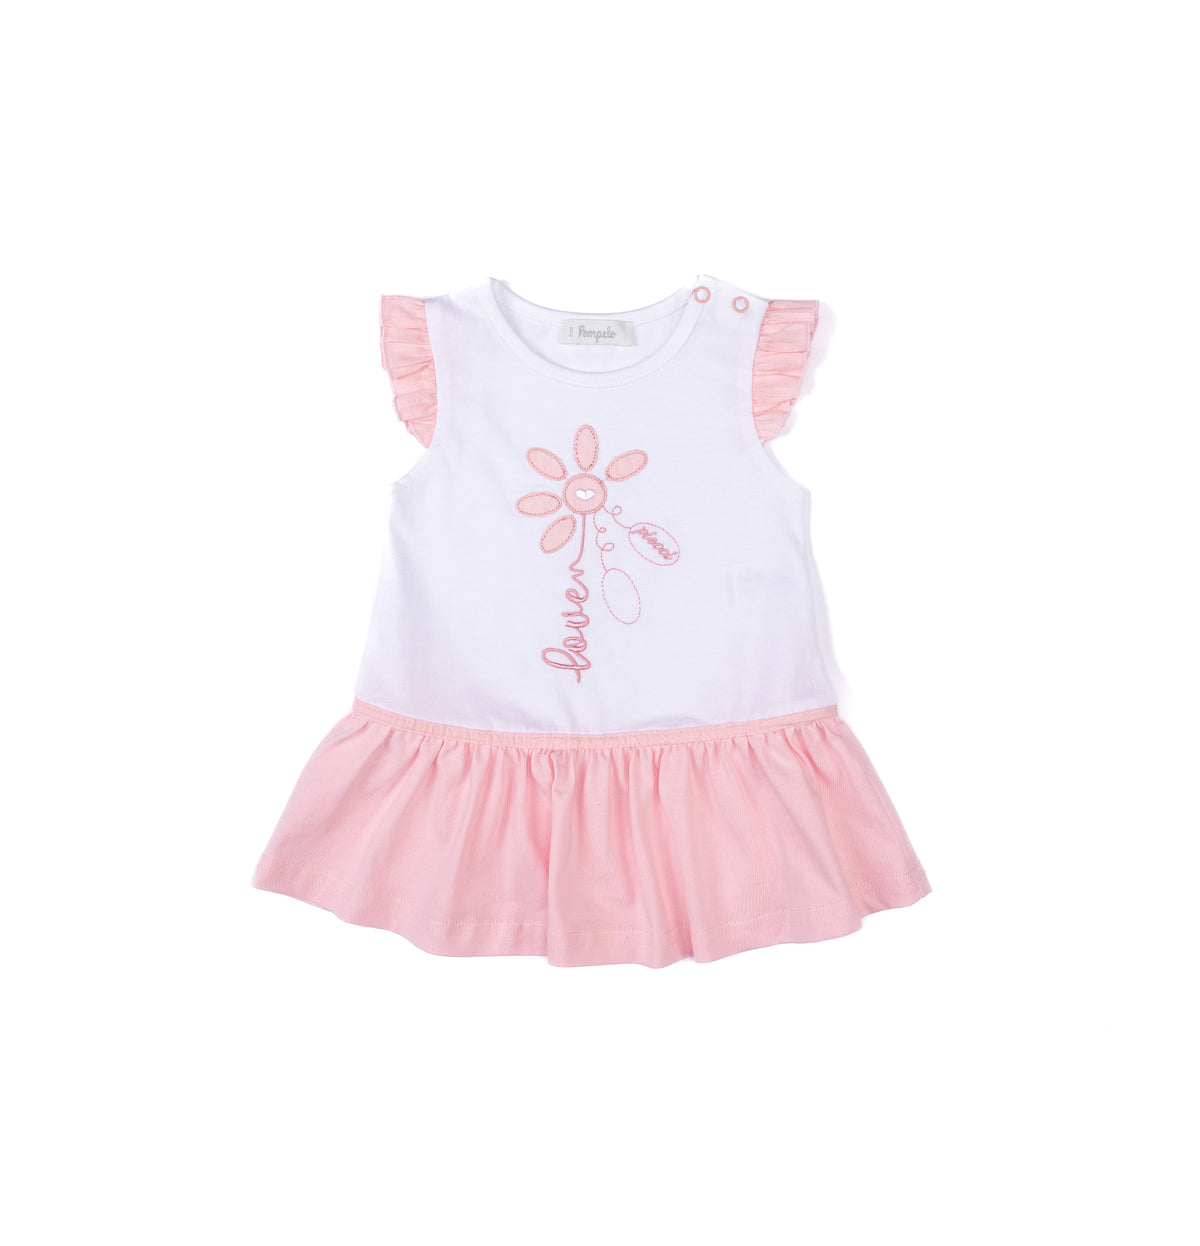 Cute soft cotton baby girl dress by Pompelo